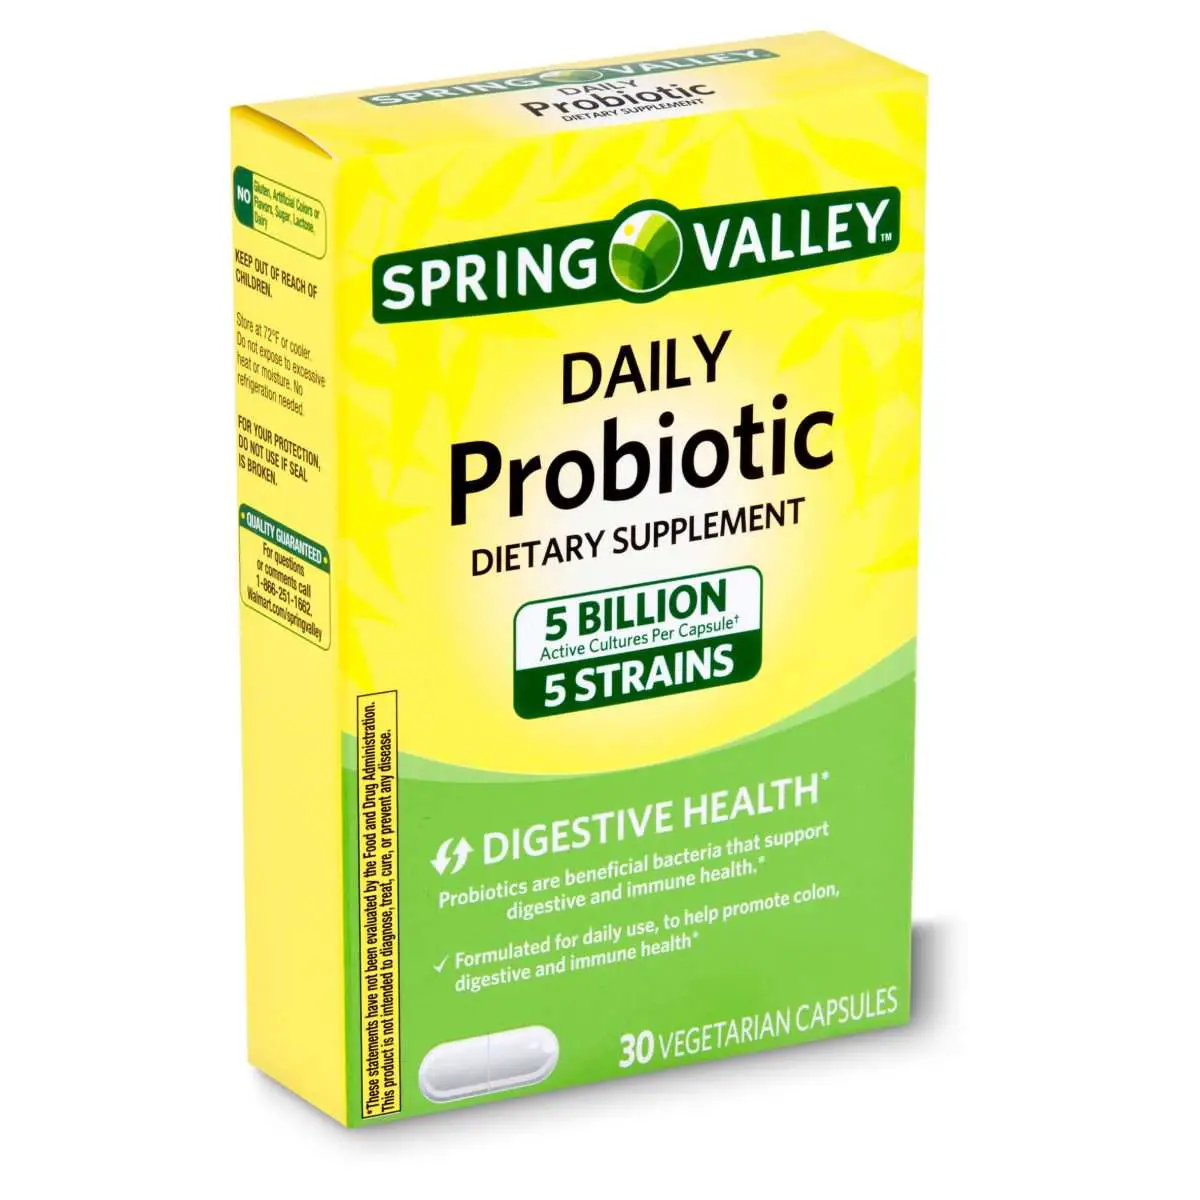 Spring Valley Daily Probiotic Dietary Supplement, 30 count